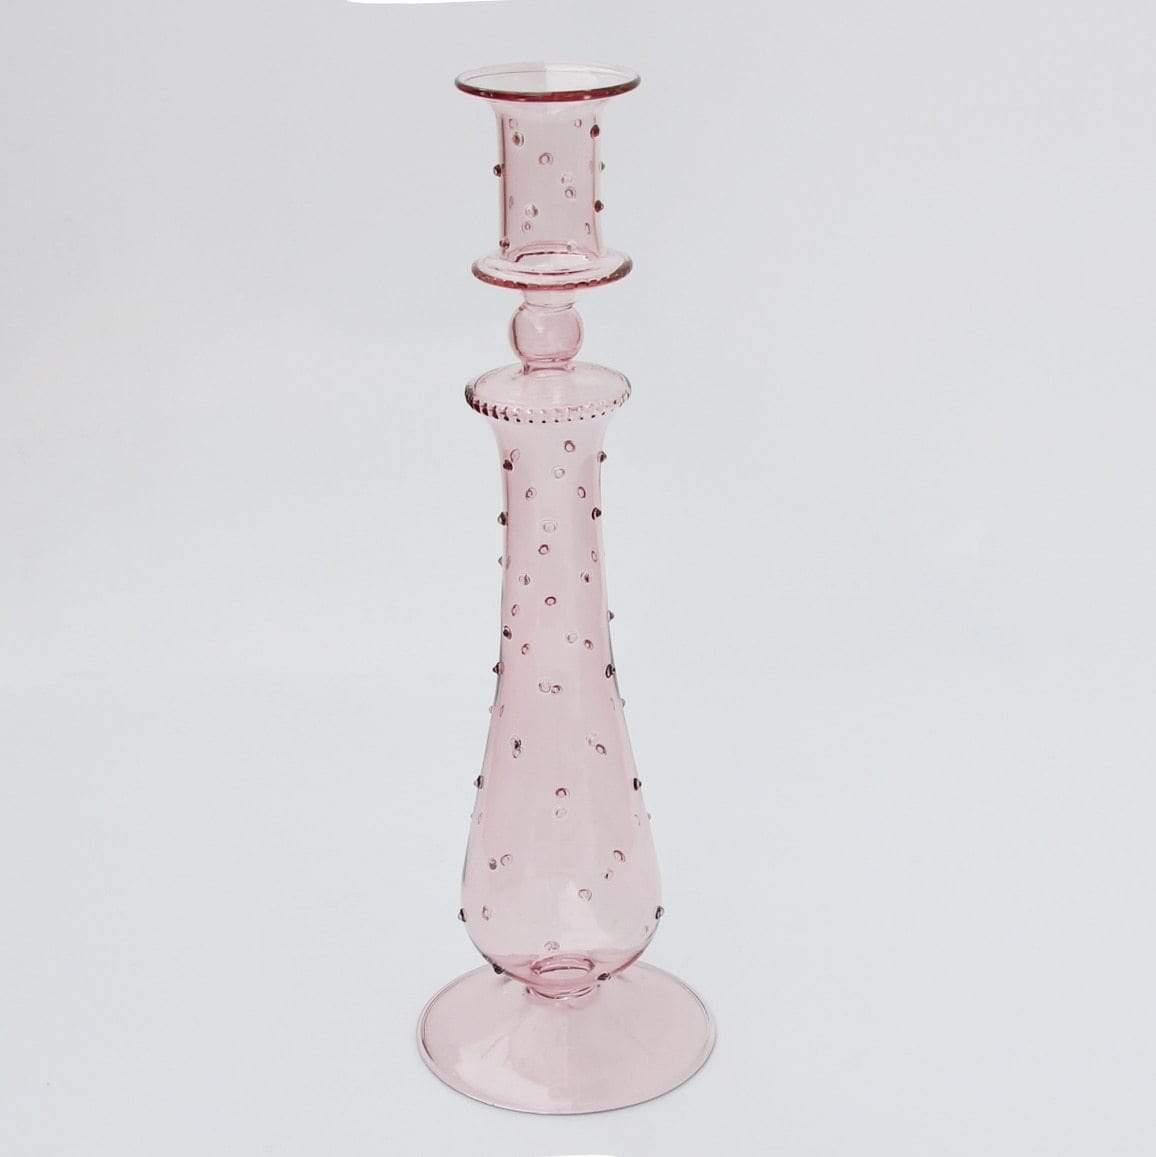 Shop 0 Pink Glass Candle Holder For Wedding Decorations Candlestick Romantic Candelabros Nordic Candle Stand Candle Holders Glass Mademoiselle Home Decor